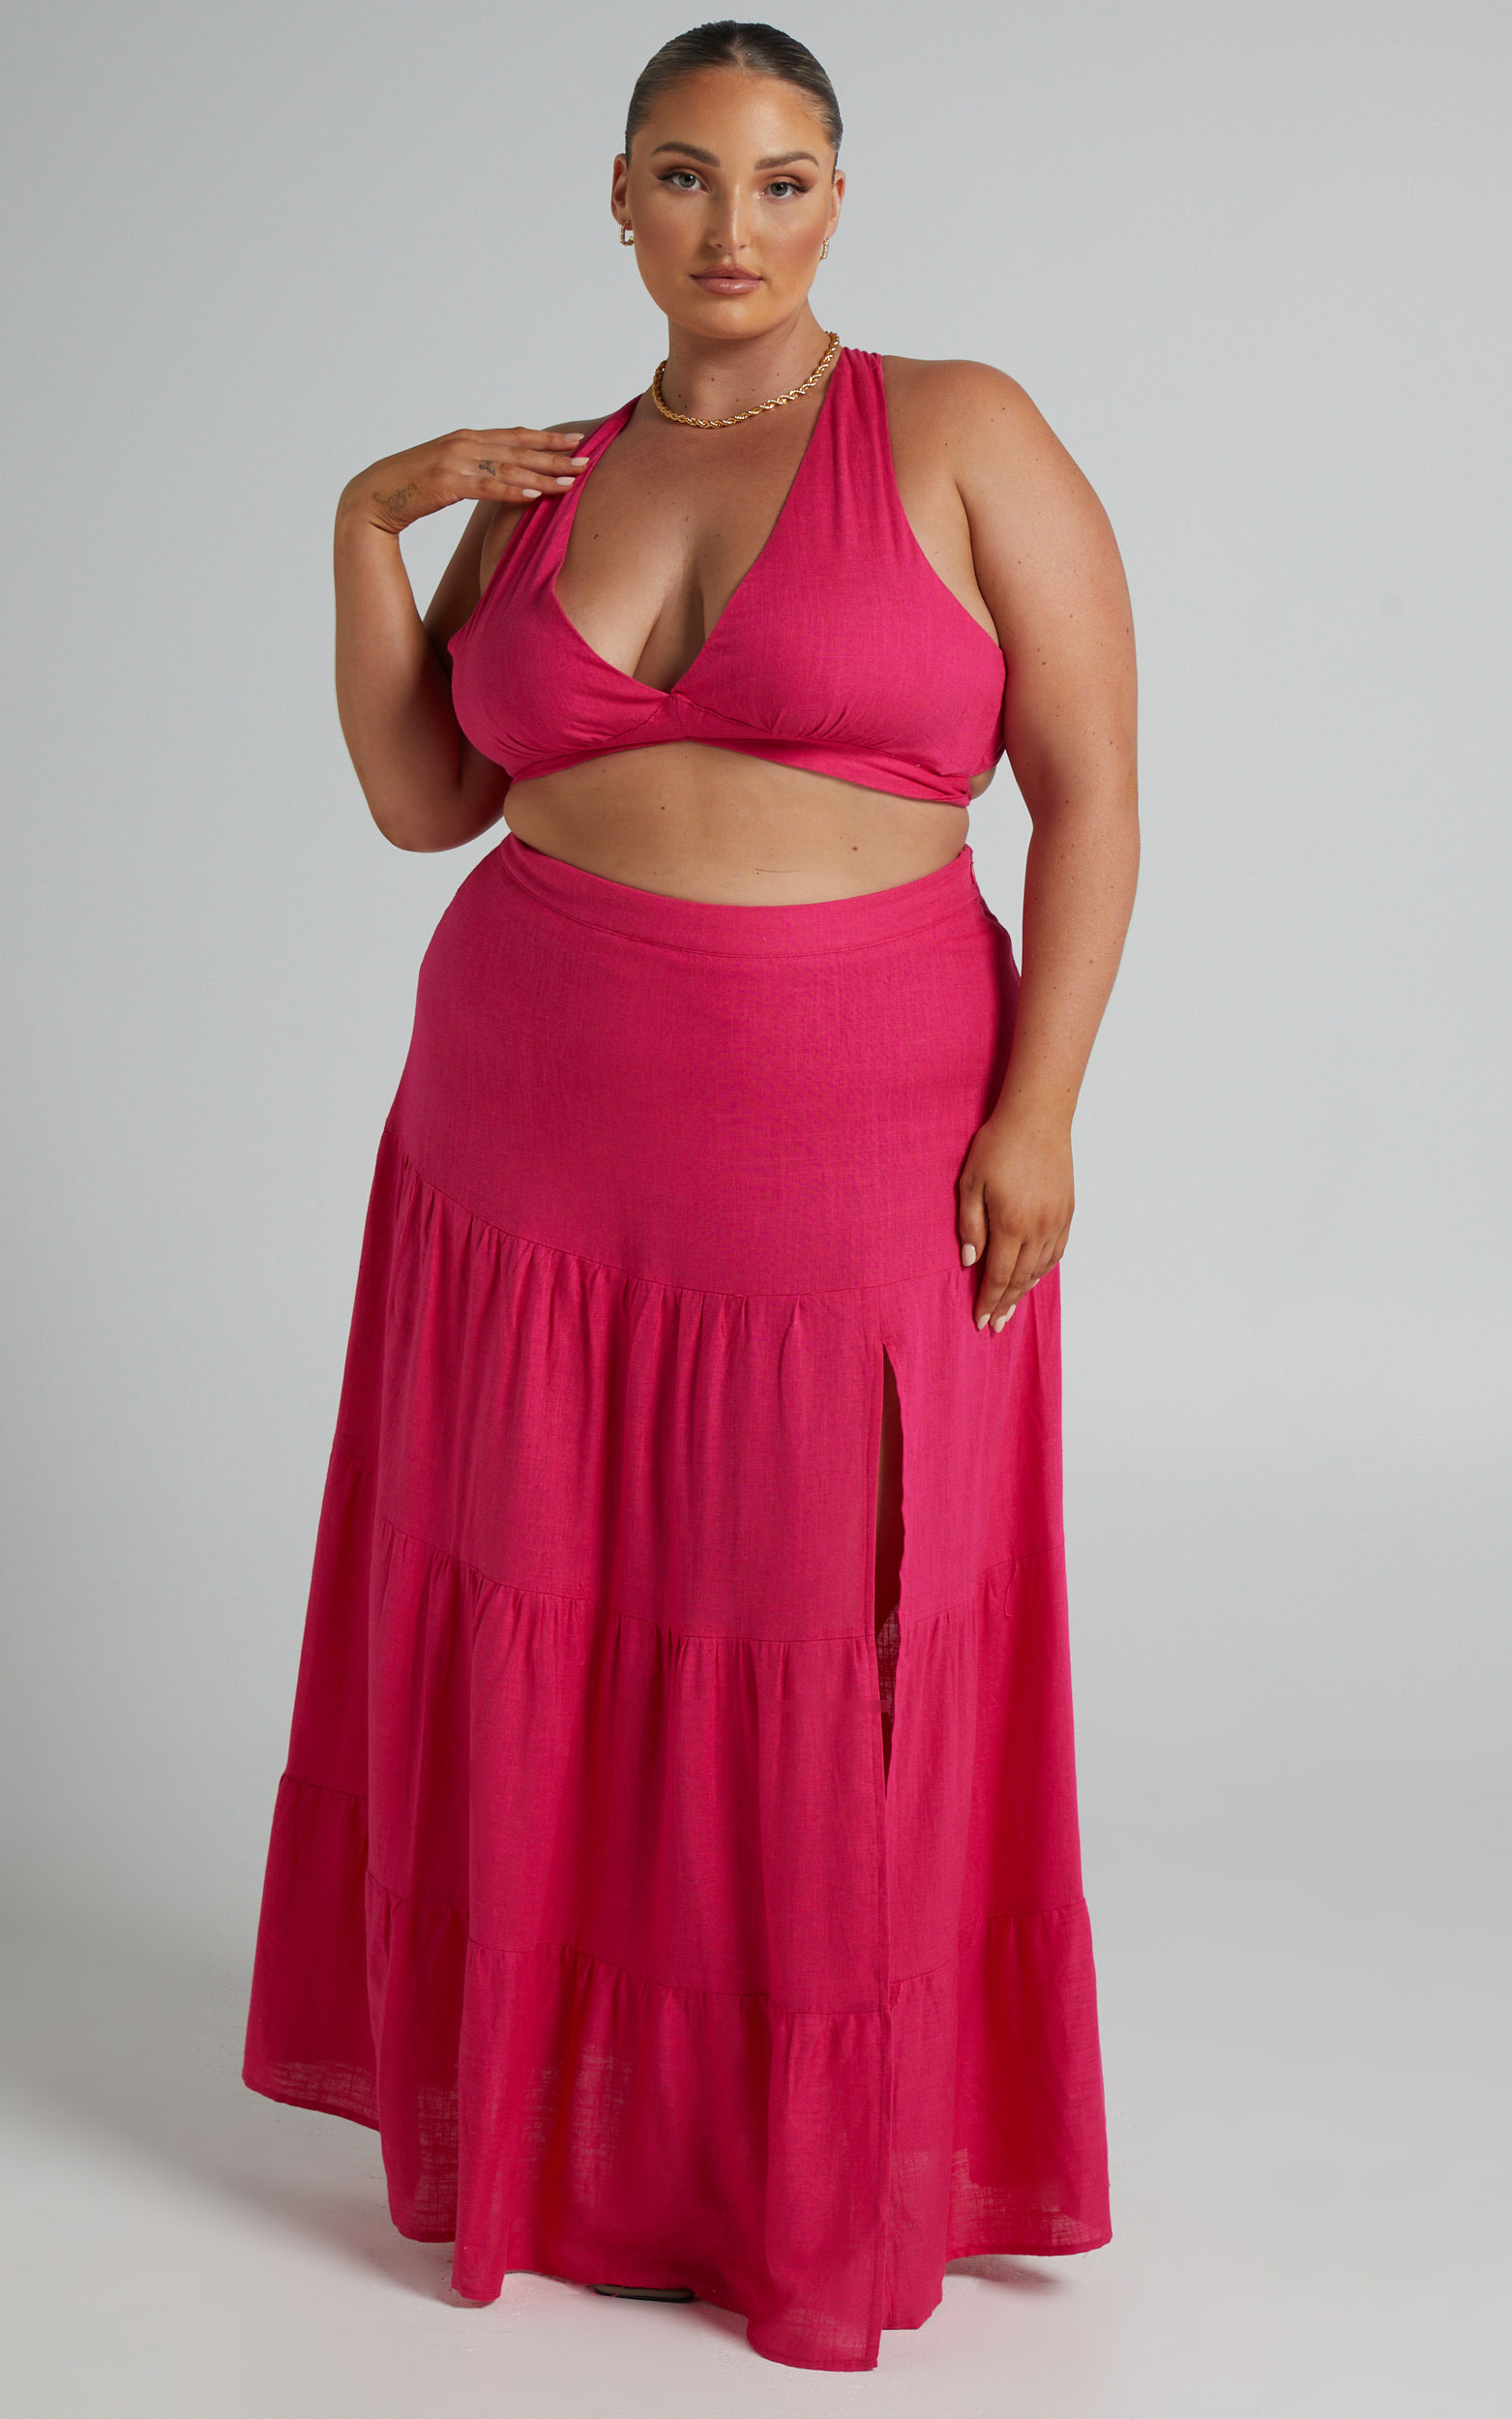 Delima two piece top and skirt set in Hot Pink - 04, PNK1, hi-res image number null